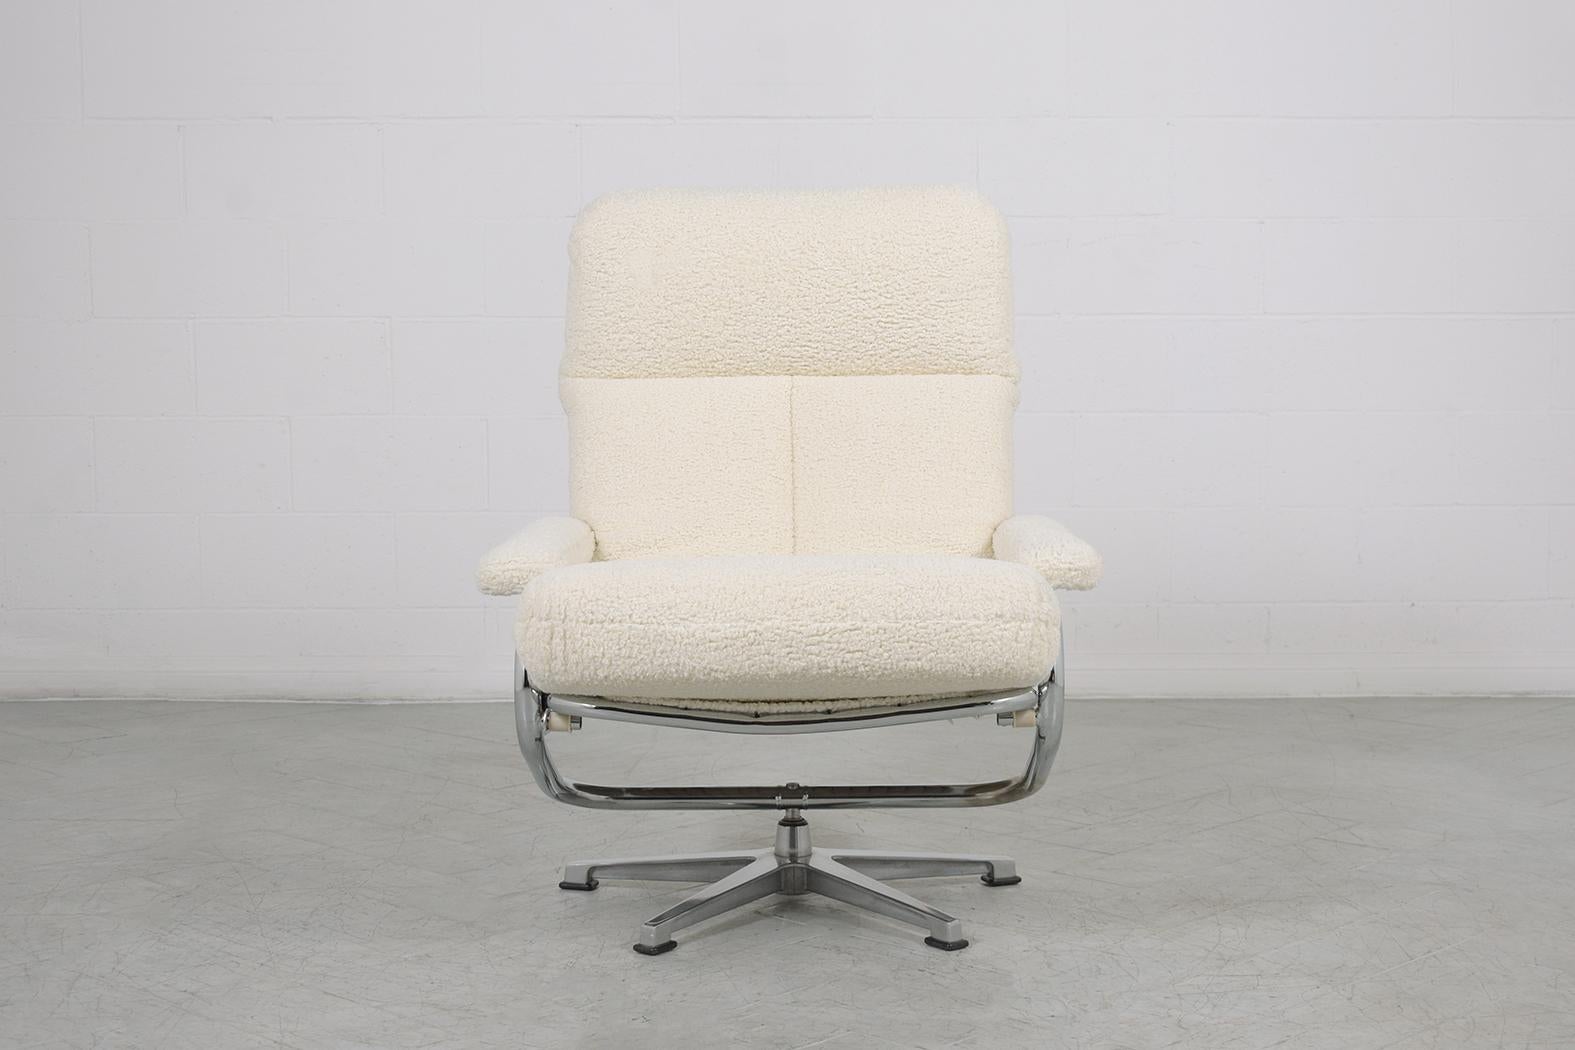 1970s Chrome-Plated Recliner Chair & Ottoman: Mid-Century Modern Revived In Good Condition For Sale In Los Angeles, CA